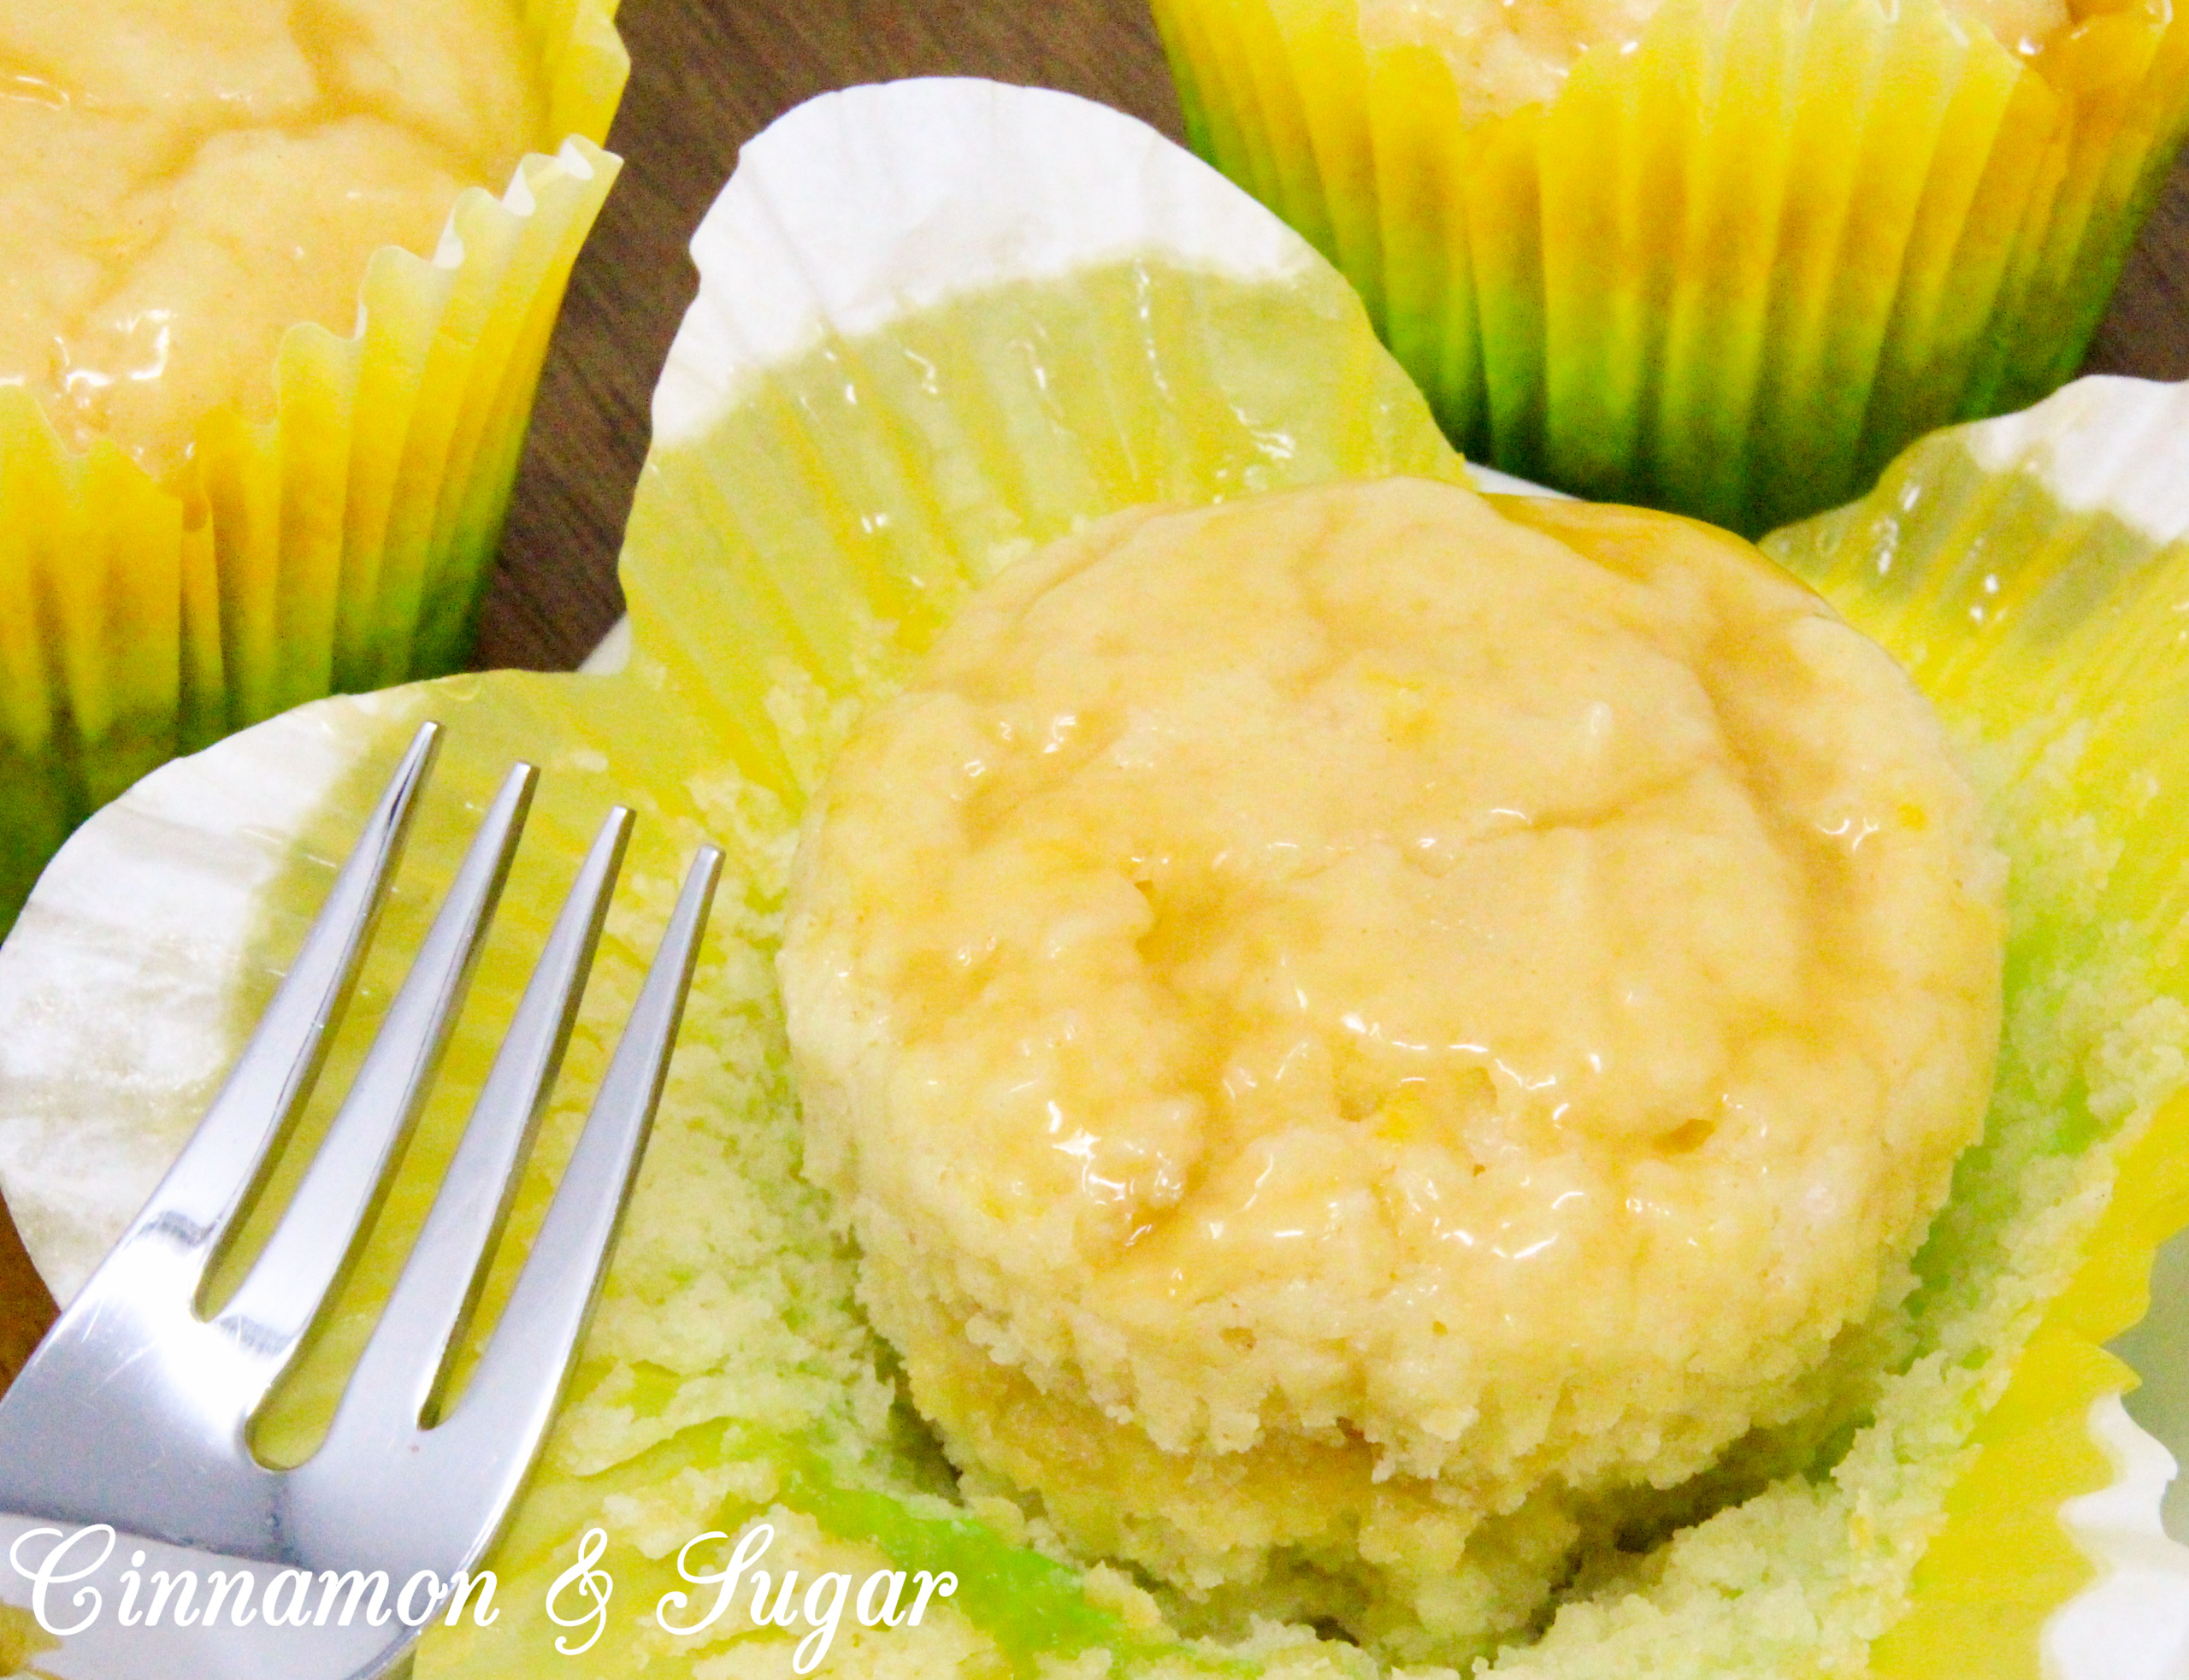 Lemon Curd Muffins are super moist and ultra flavorful thanks to the generous amounts of lemon zest, lemon juice, and lemon curd! A delicious treat for breakfast and snack time, or serve with a dollop of ice cream for dessert. Recipe shared with permission granted by Libby Klein, author of WINE TASTINGS ARE MURDER.